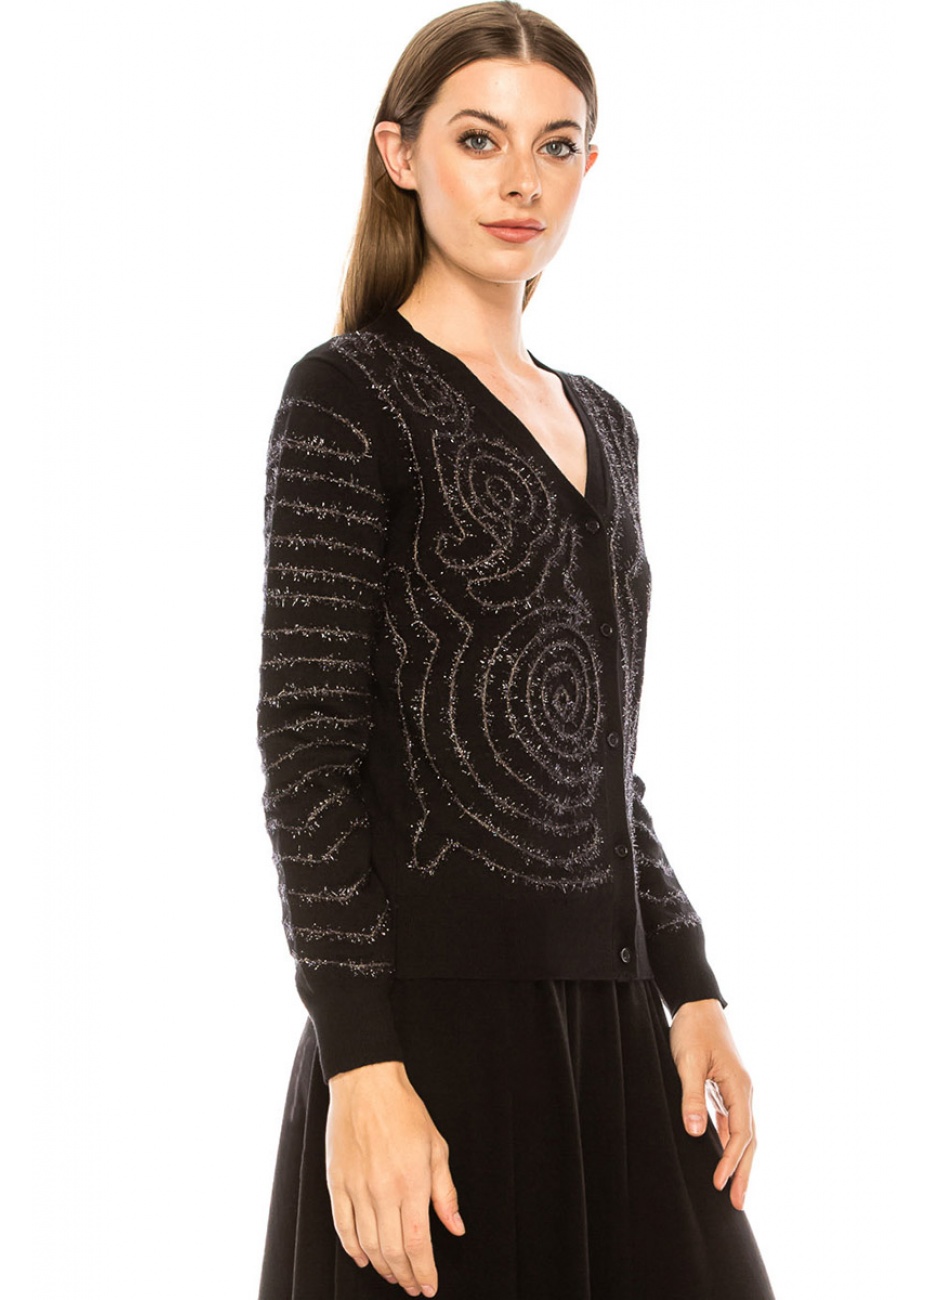 Embroidered shiny cardigan in black